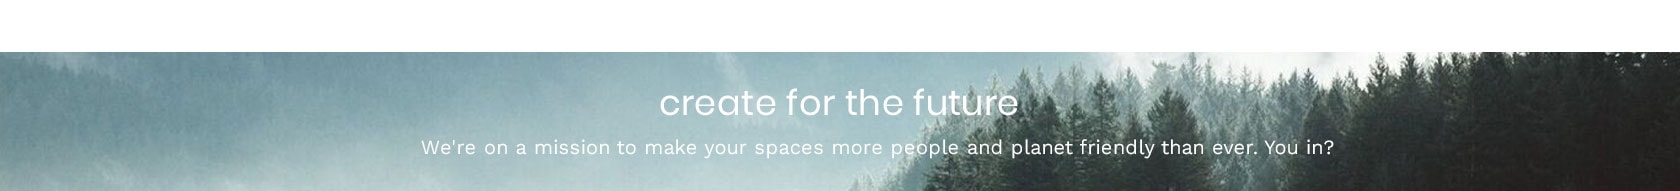 Create for the Future – We're on a mission to make your spaces more people and planet friendly than ever. You in?